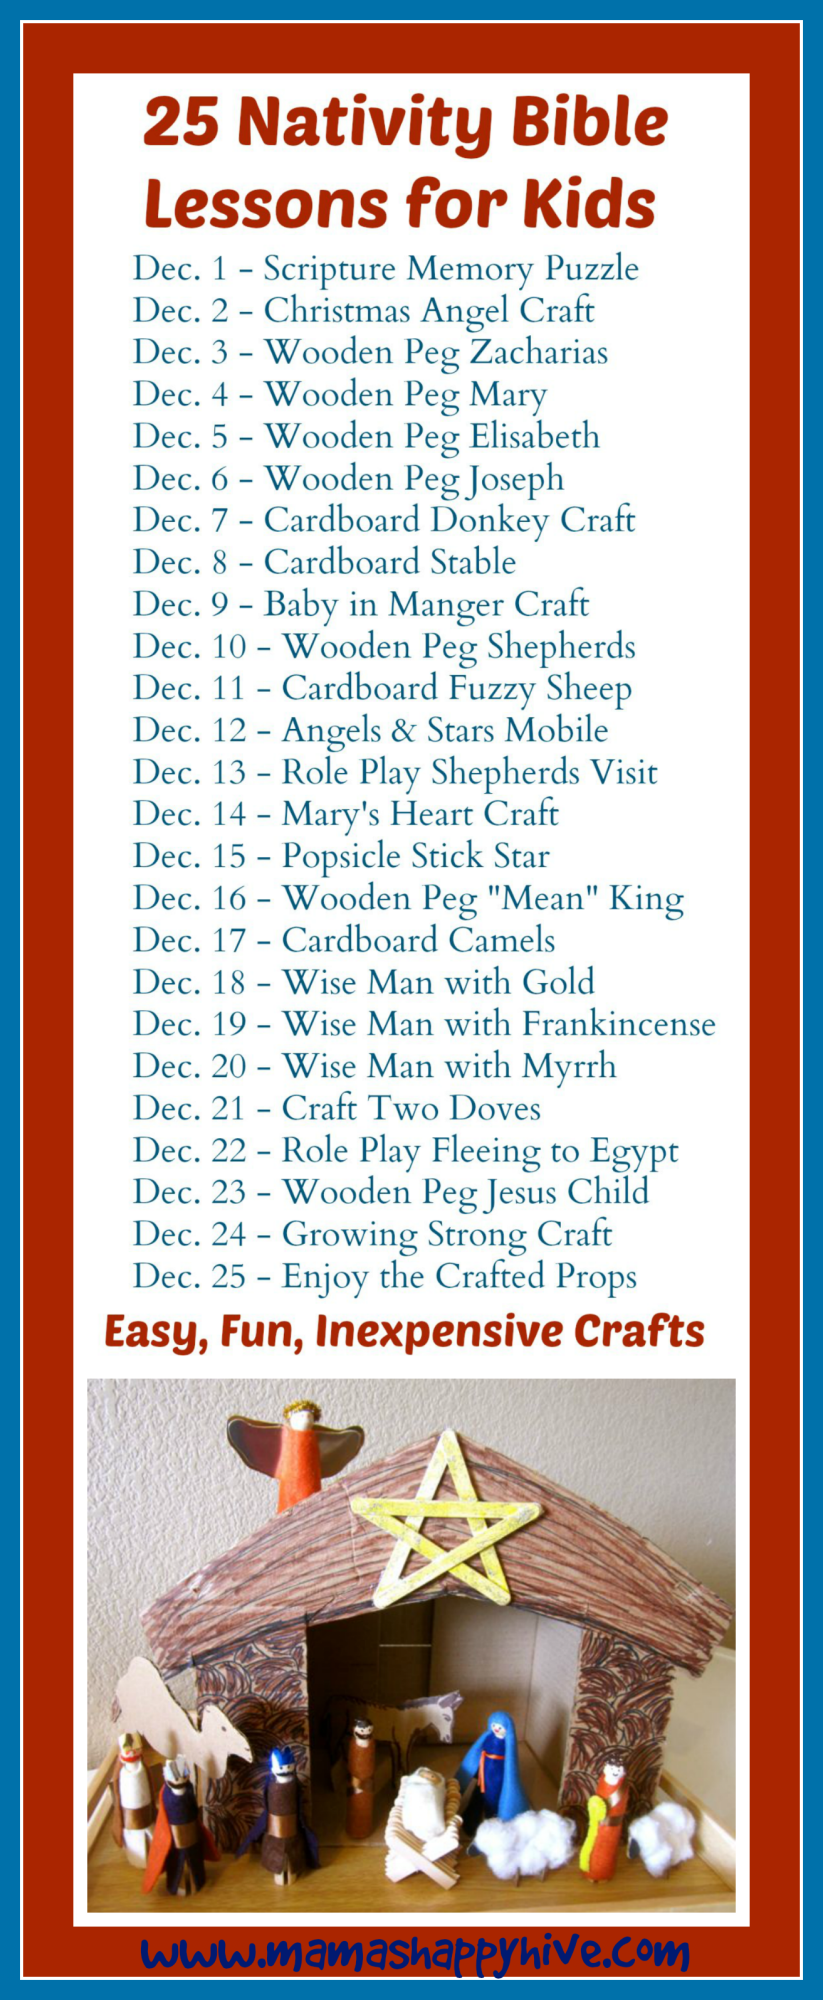 25 Nativity Bible Lessons for Kids - www.mamashappyhive.com